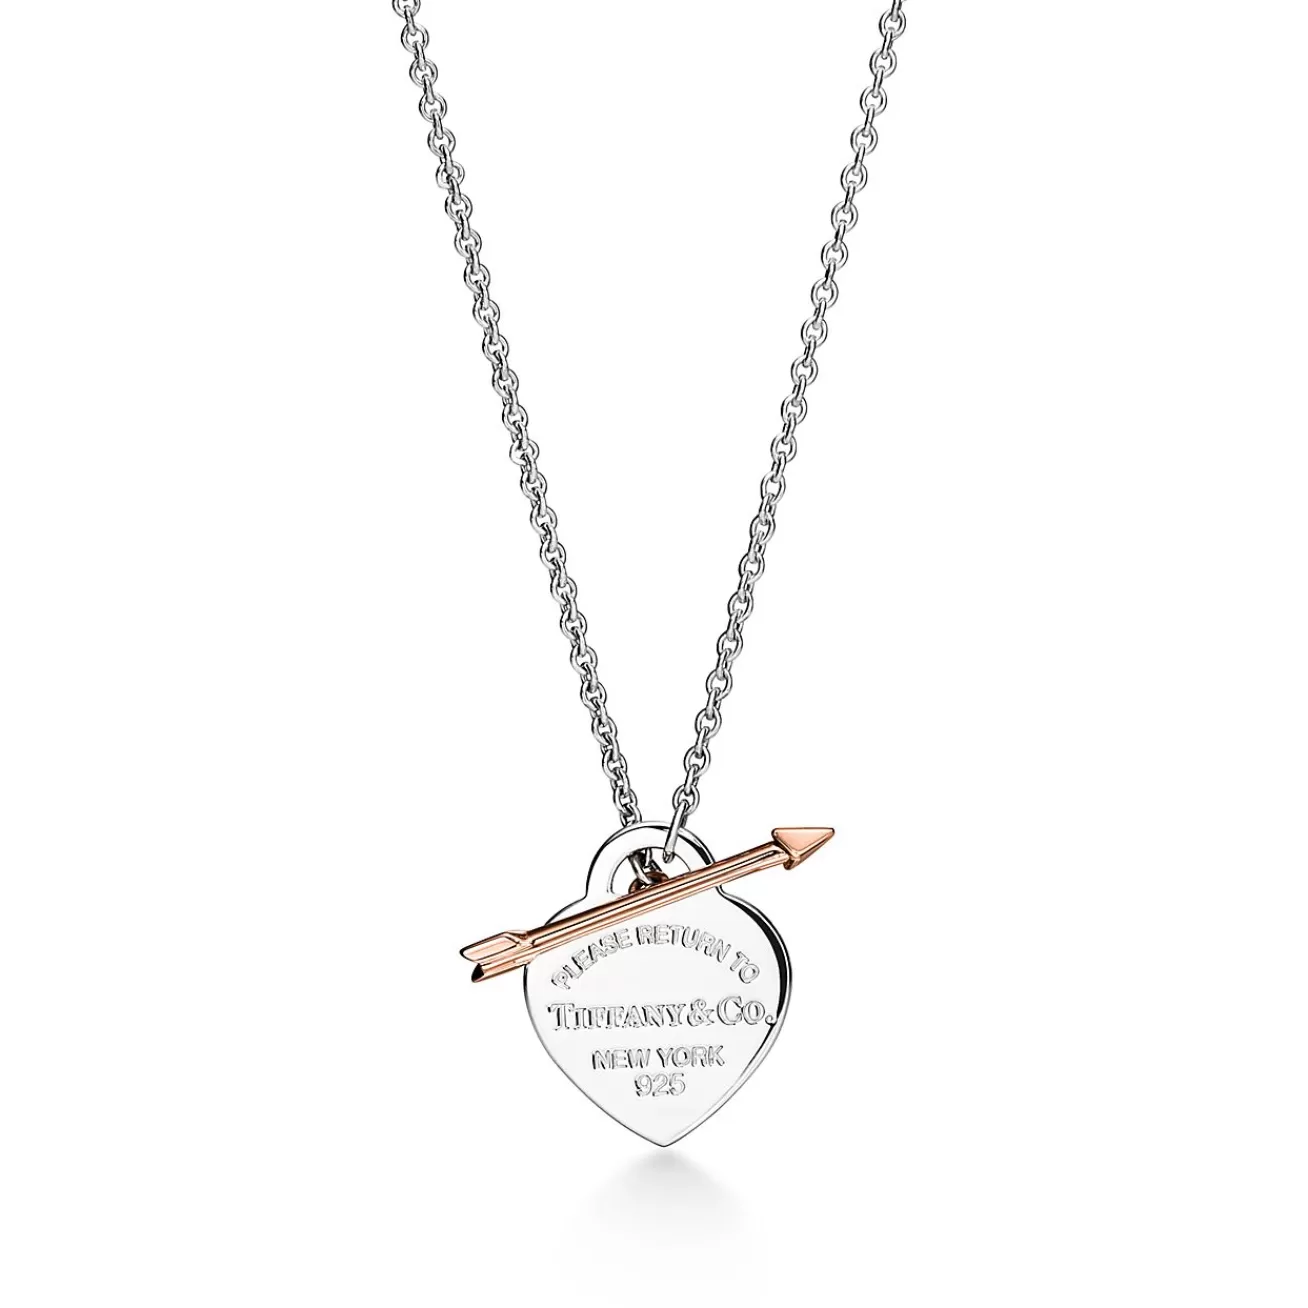 Tiffany & Co. Return to Tiffany® Lovestruck Heart Tag Pendant in Silver and Rose Gold, Medium | ^ Necklaces & Pendants | Gifts for Her